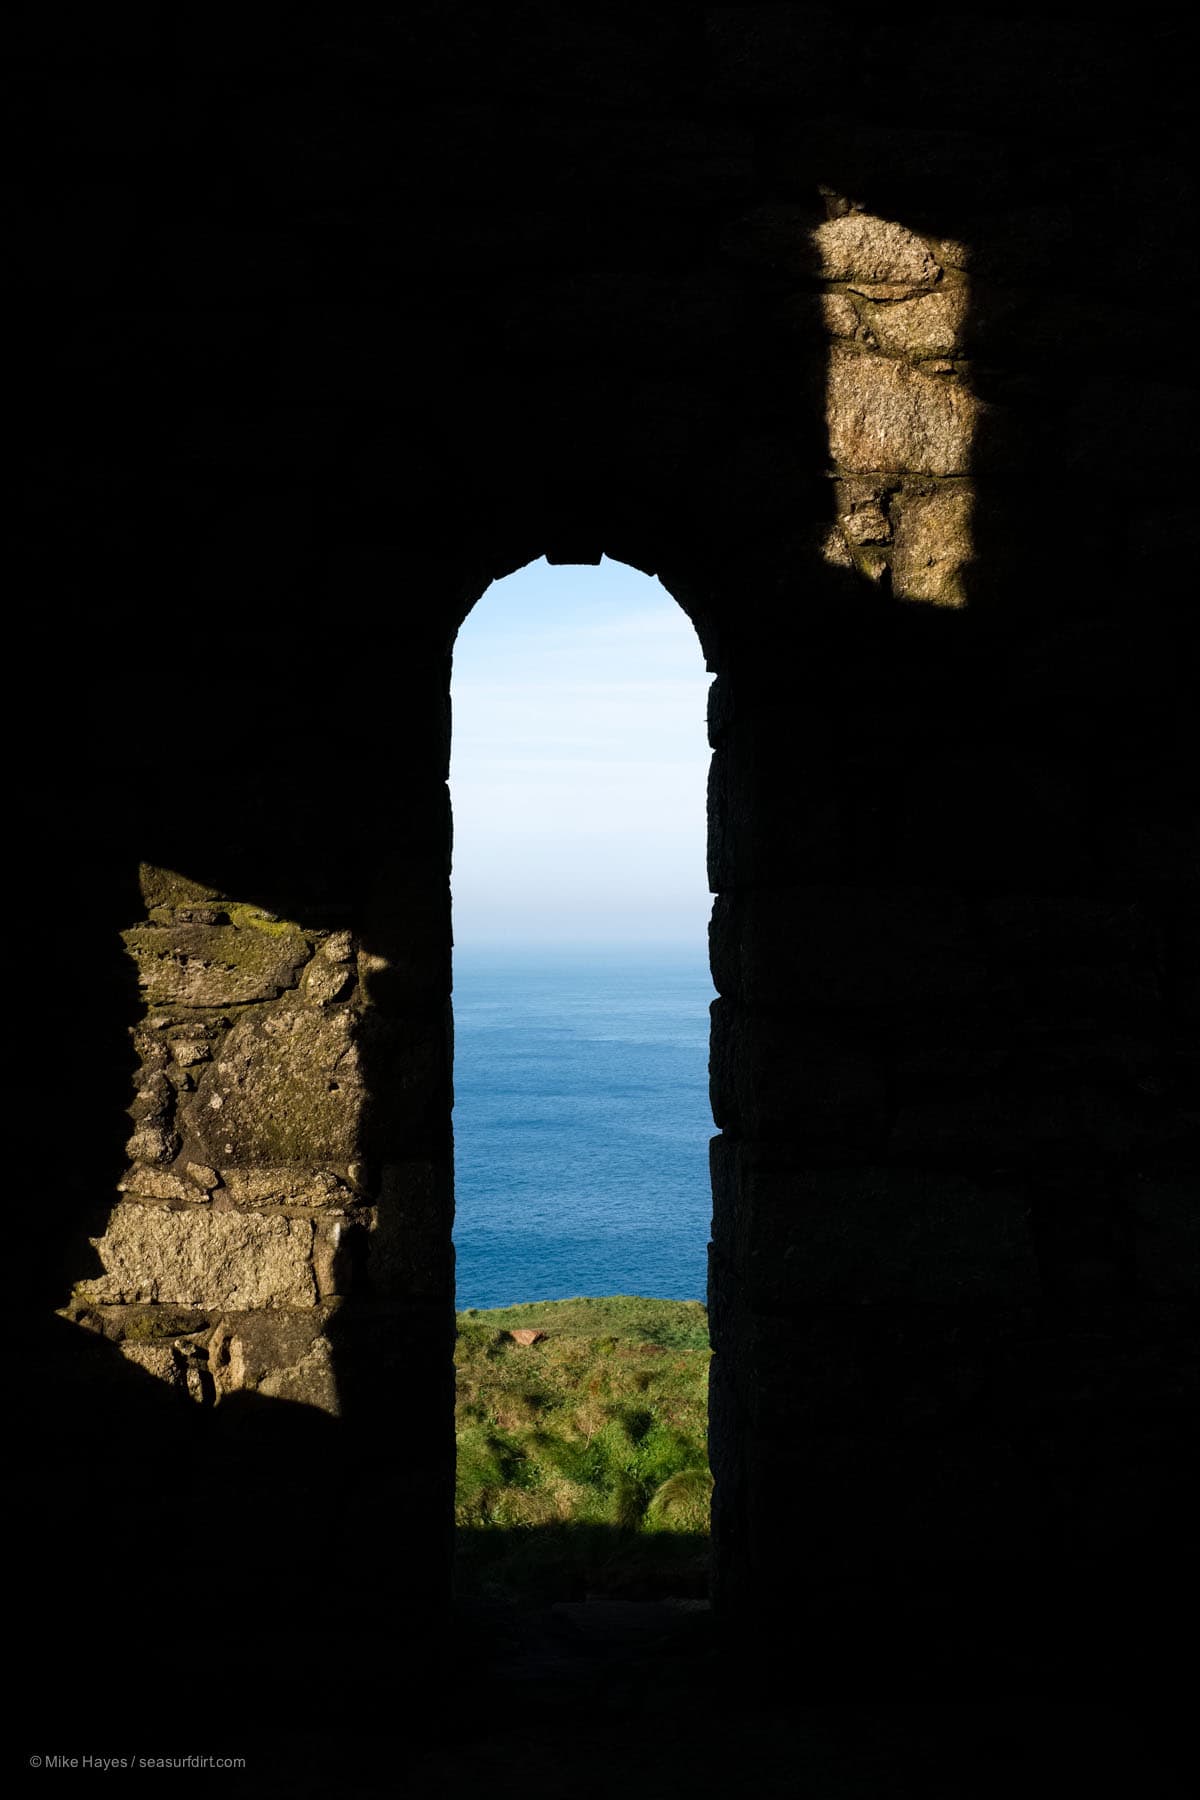 cornish min engine house window, looking out to sea